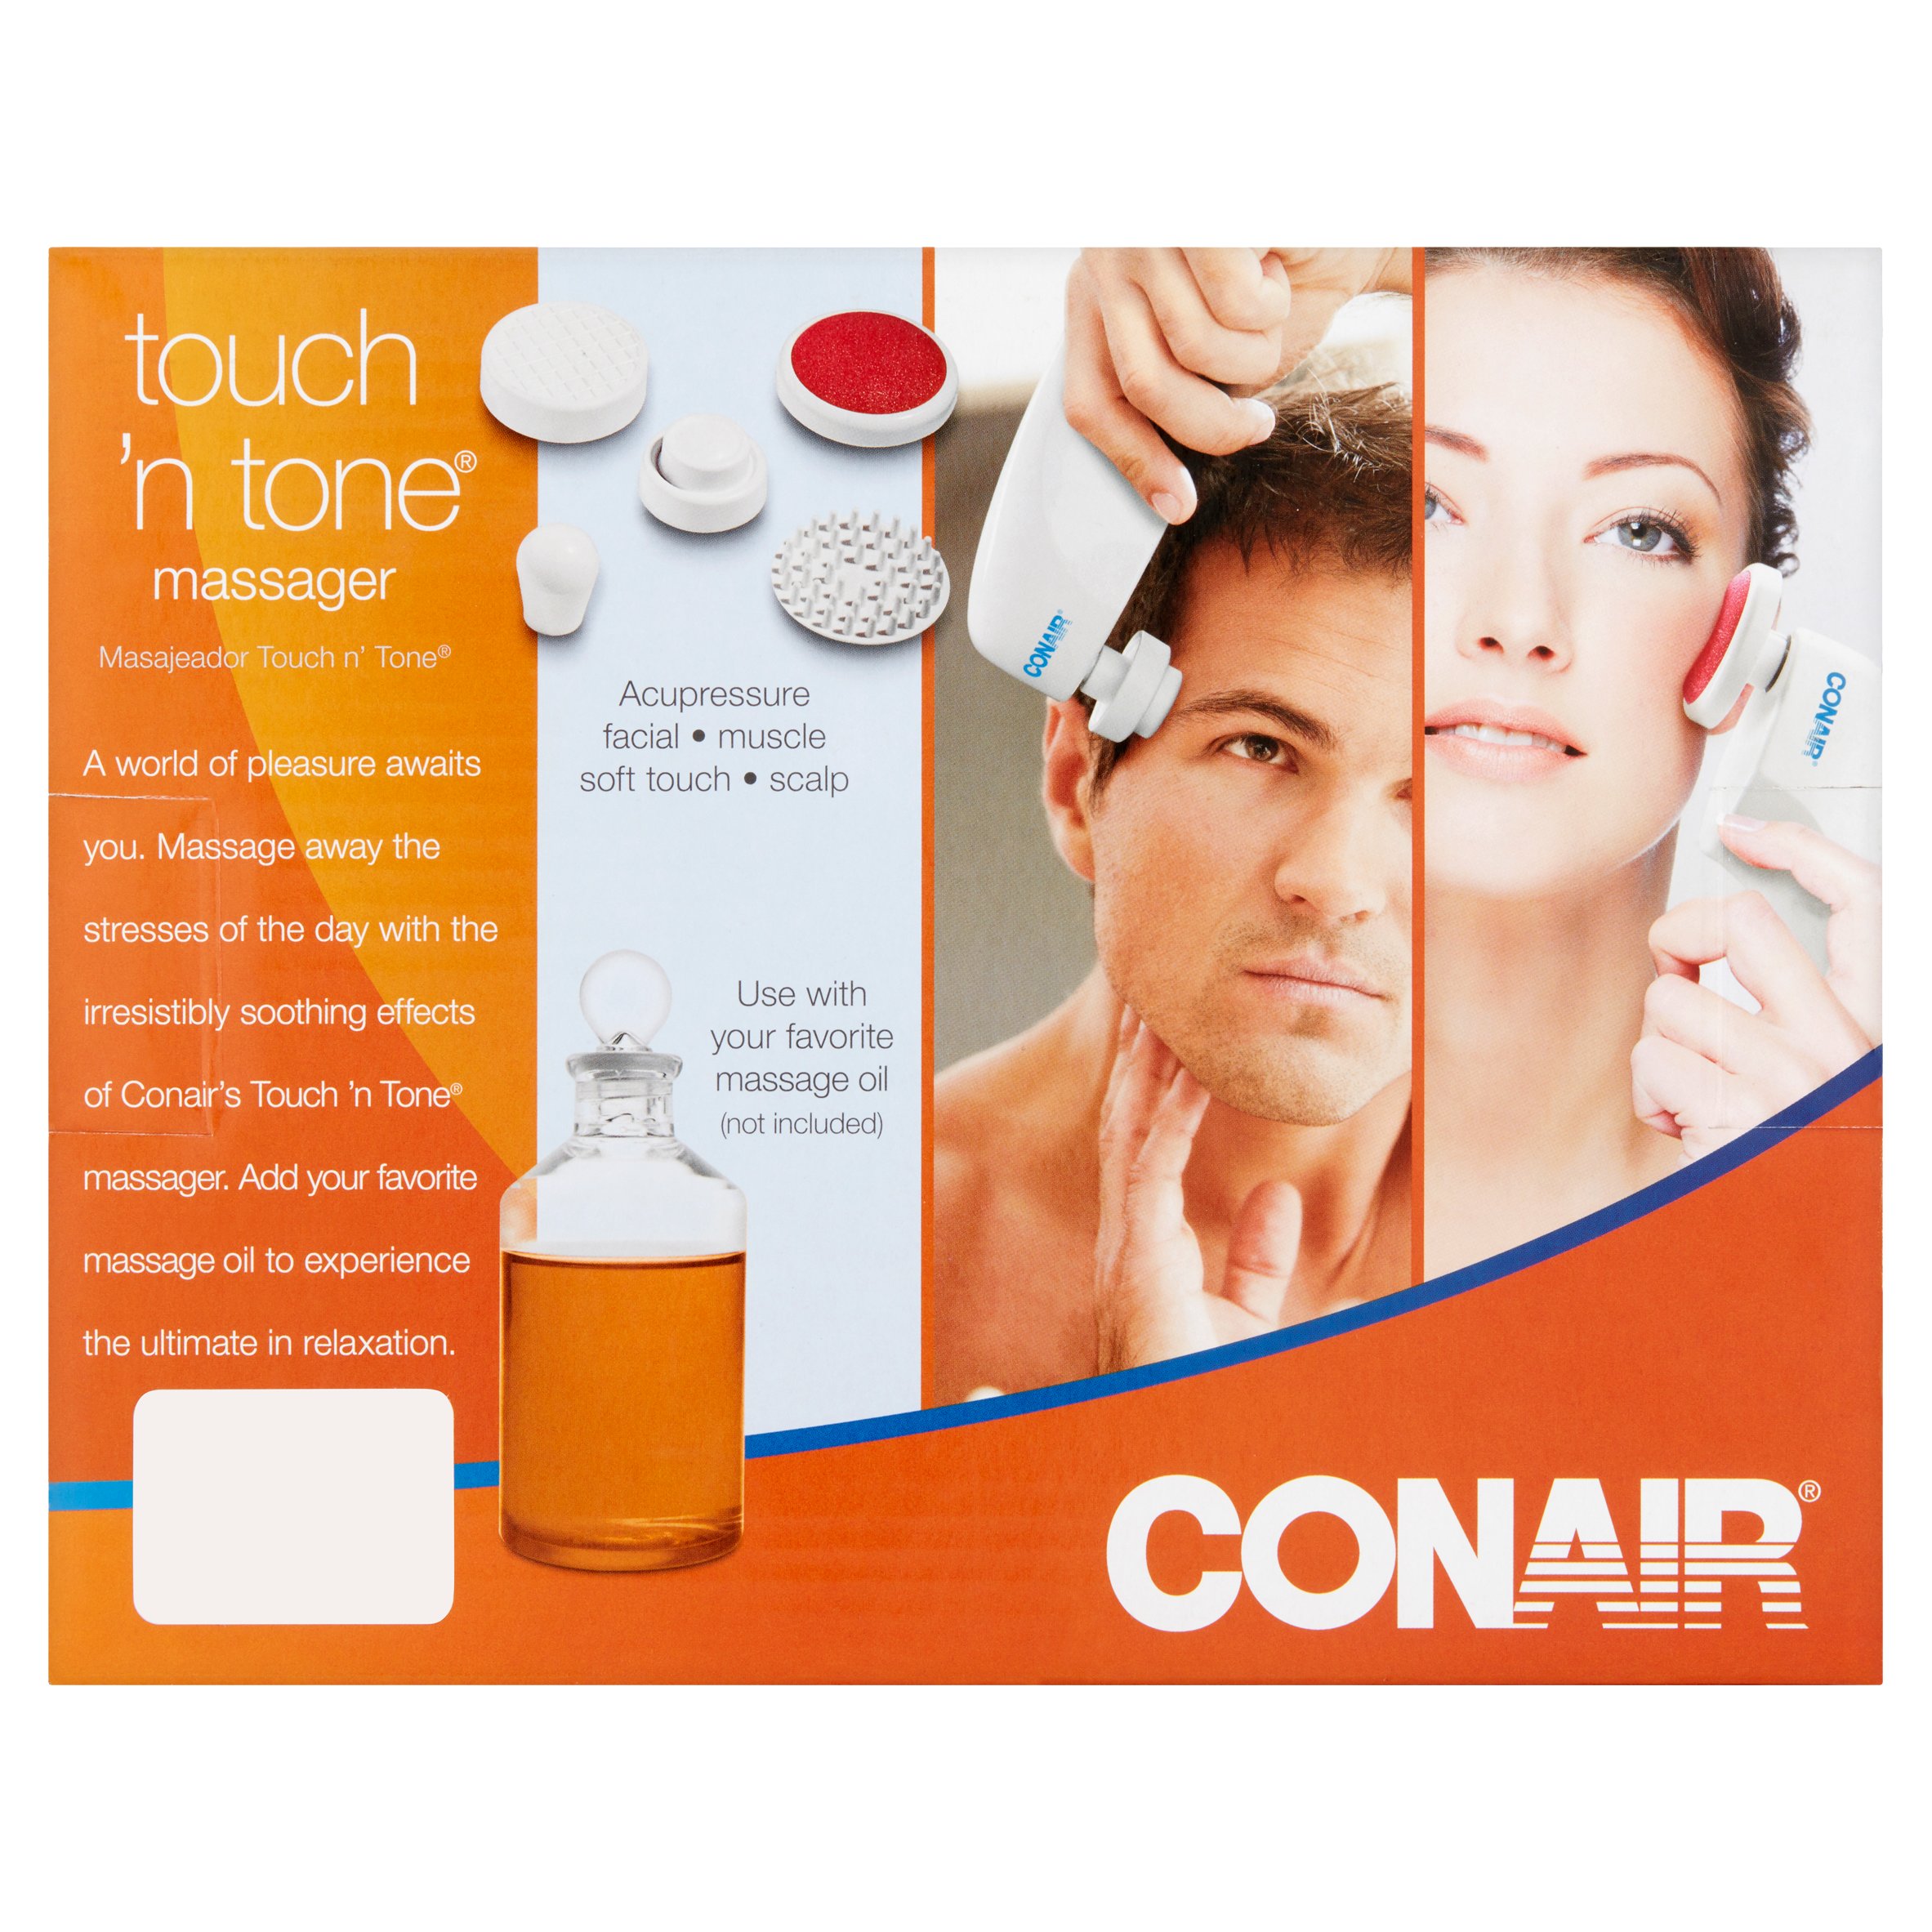 Conair® Touch N Tone® Massager - image 3 of 4